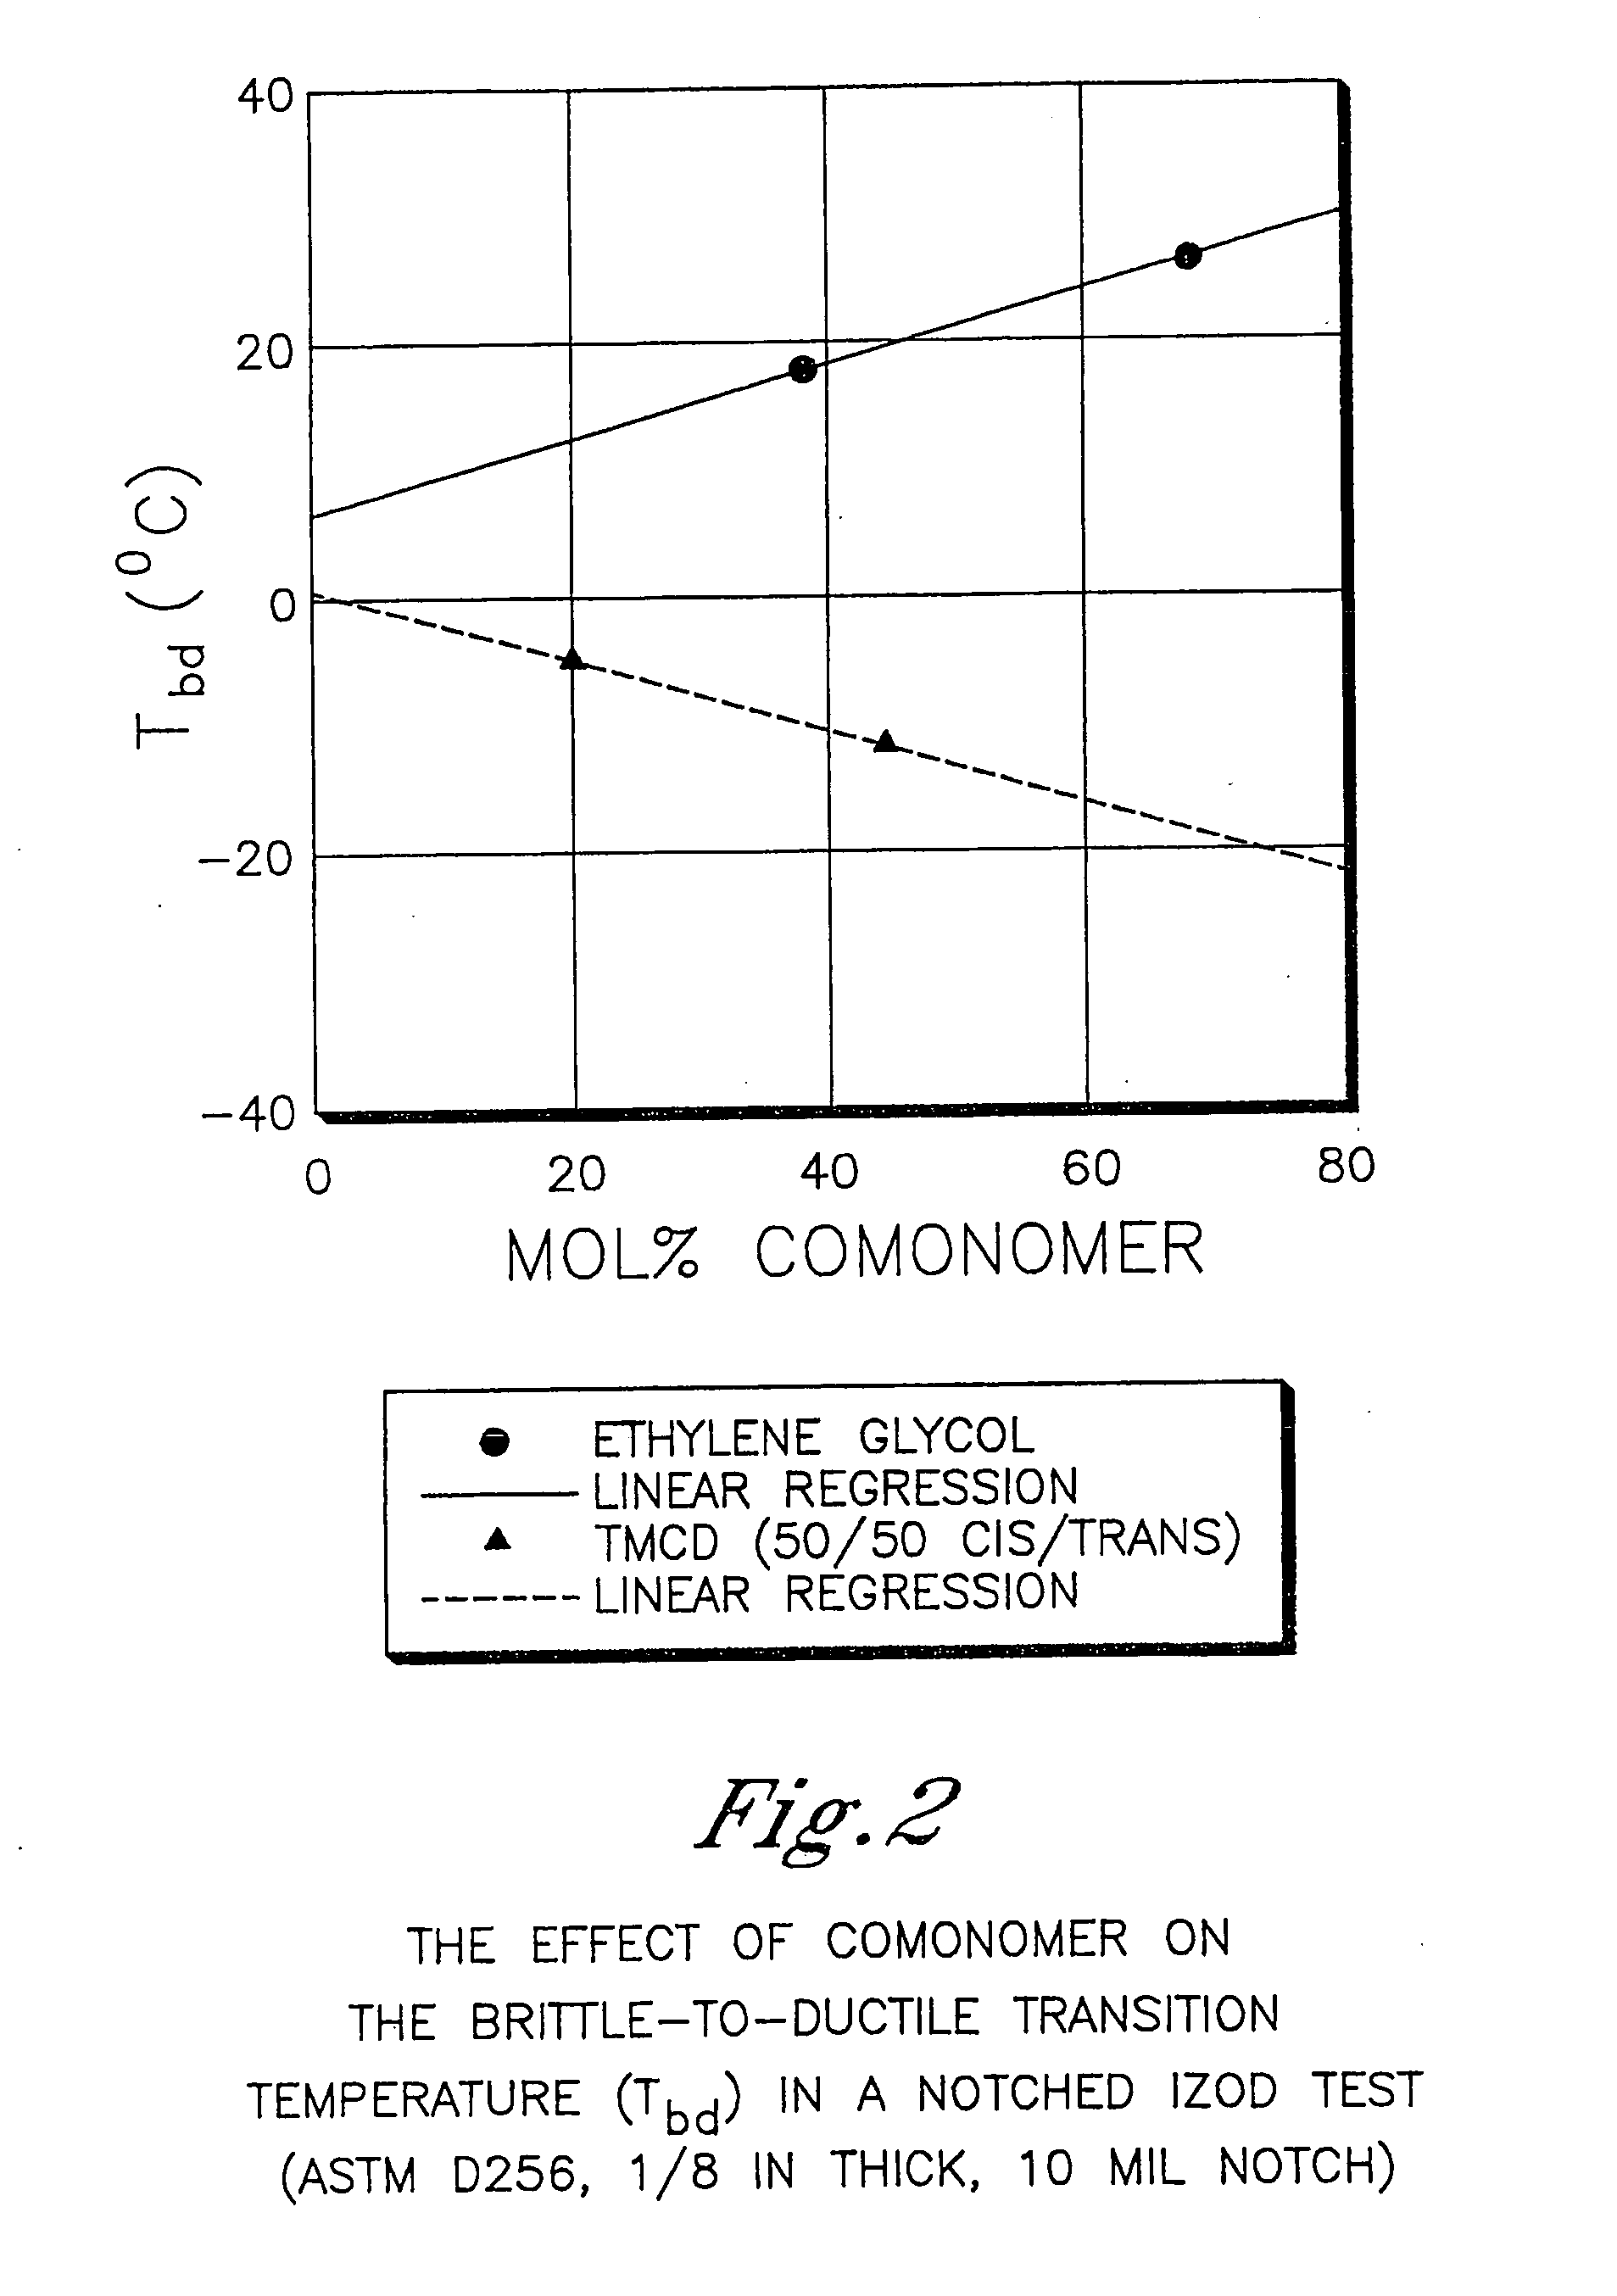 Sound barriers comprising polyester compositions formed from 2,2,4,4-tetramethyl-1,3-cyclobutanediol and 1,4-cyclohexanedimethanol